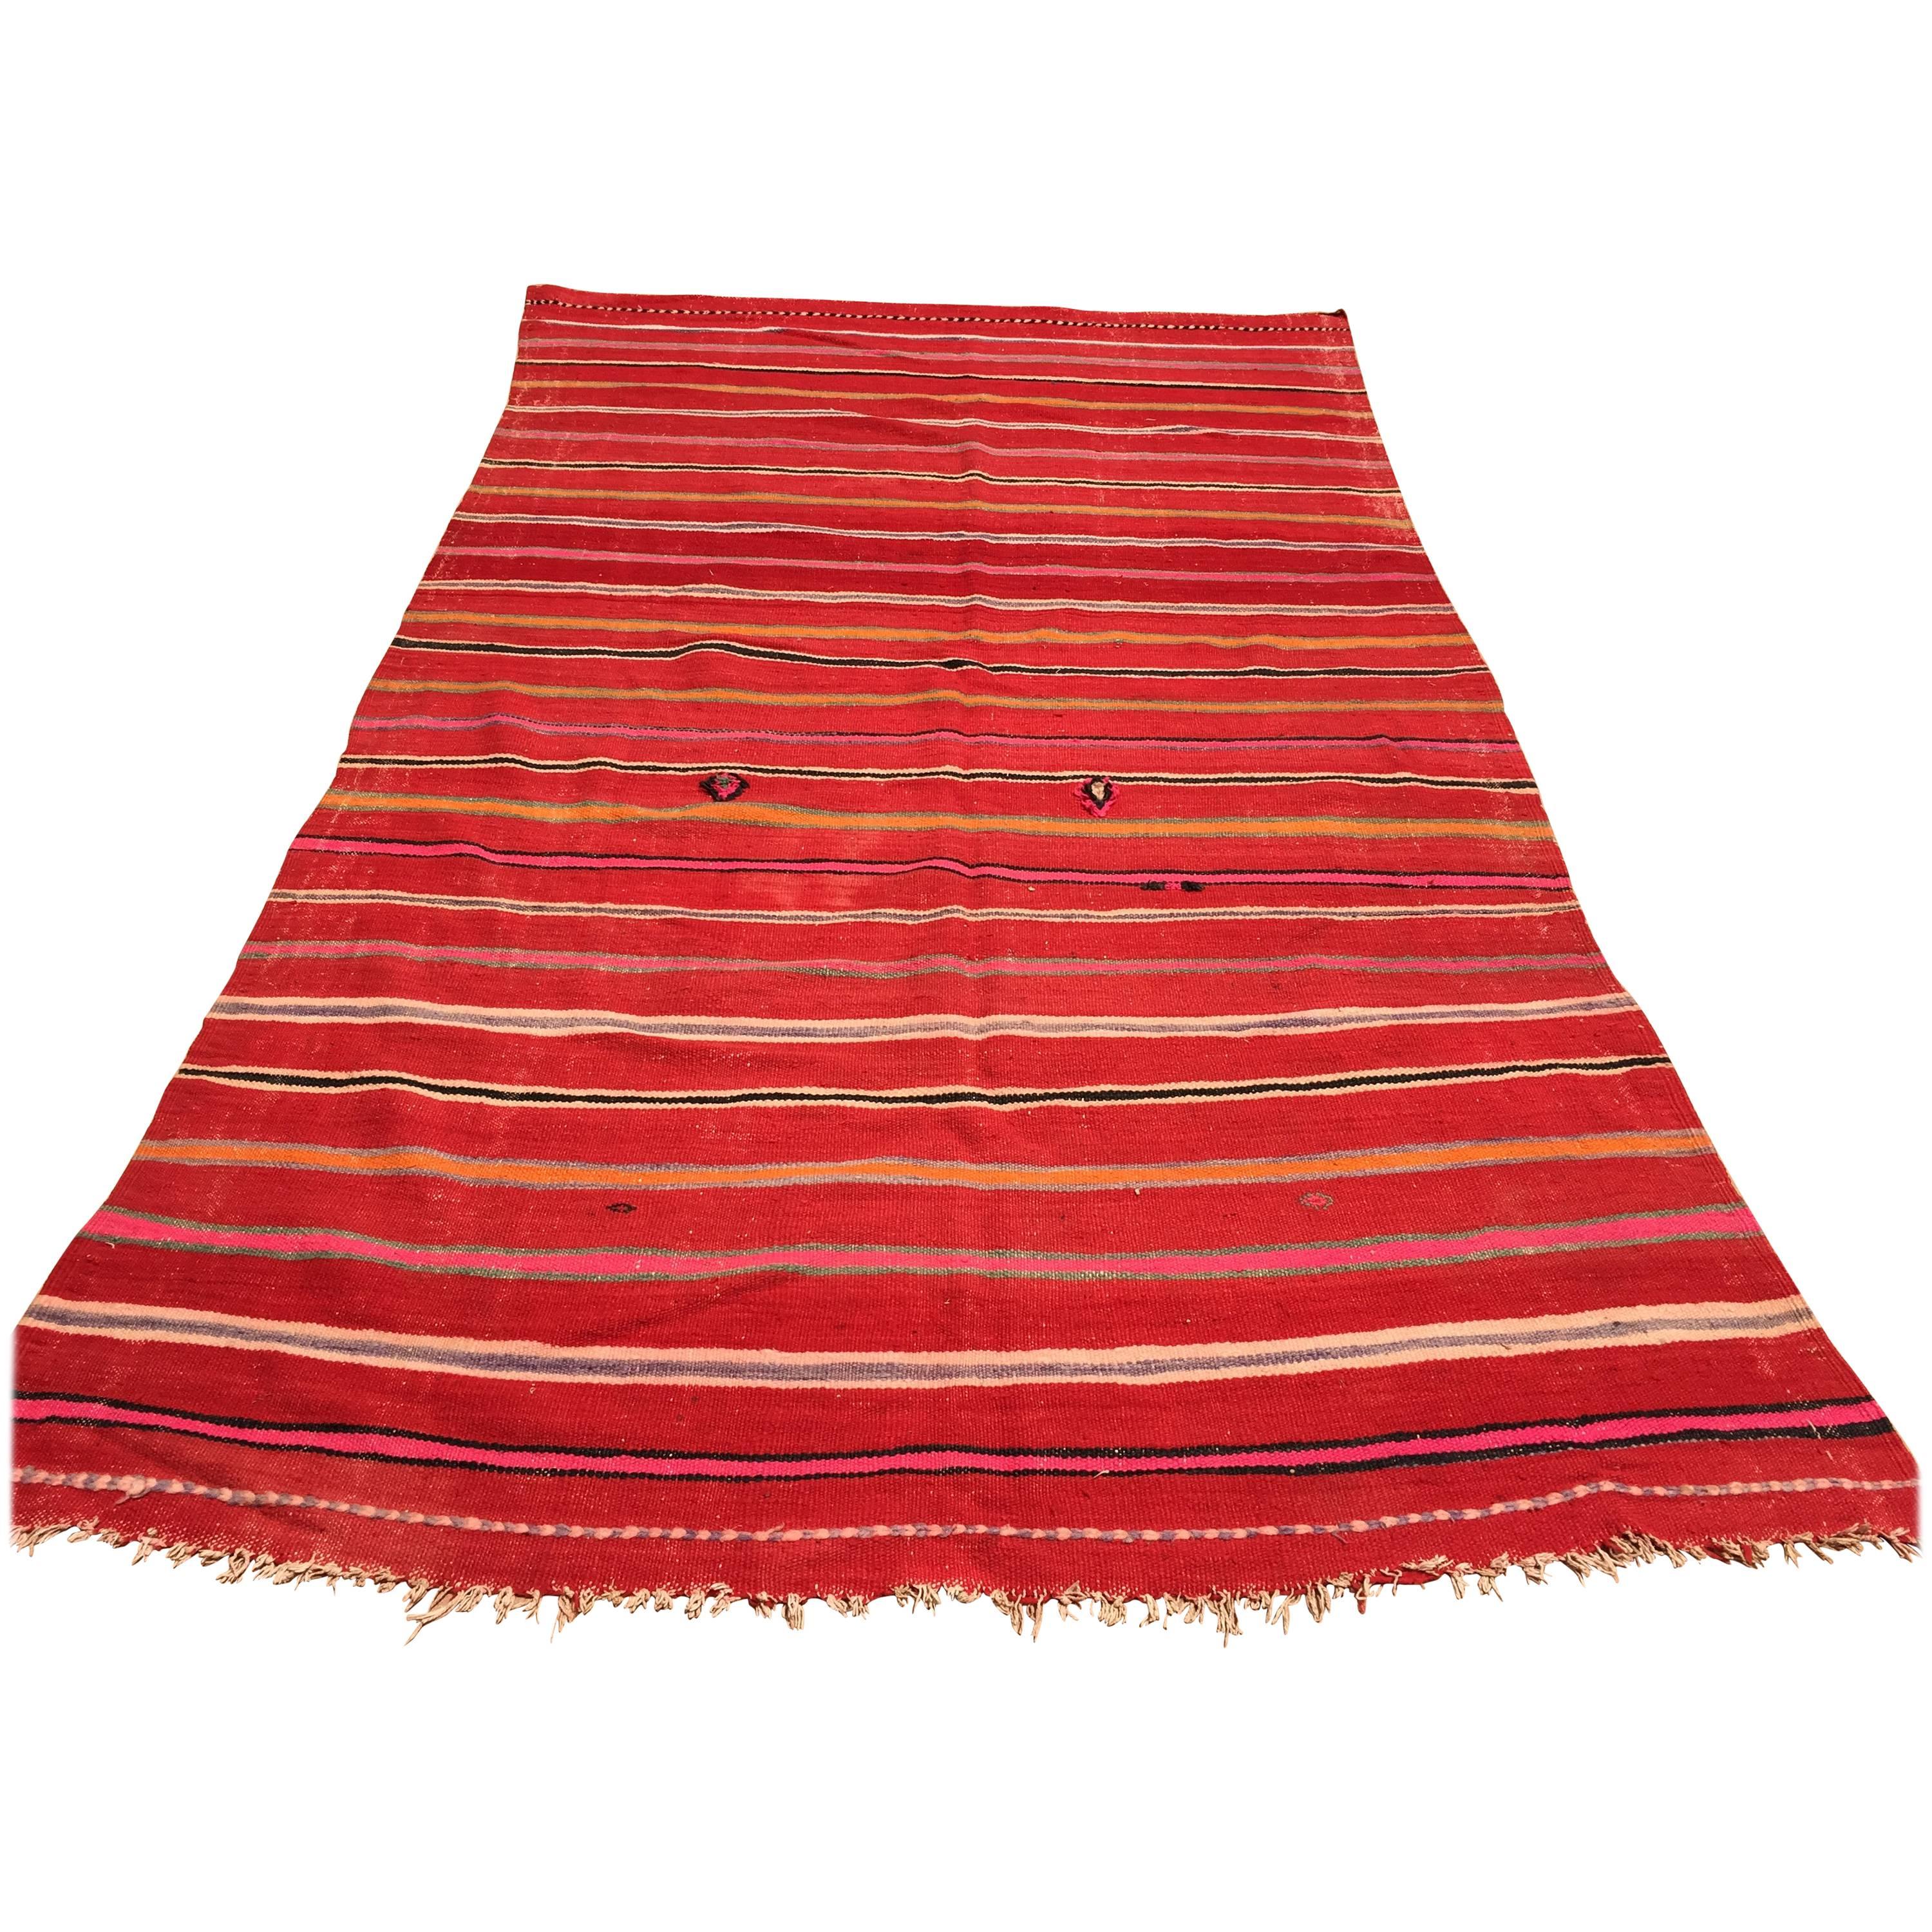 Vintage Moroccan Flat-Weave Rug with Stripes